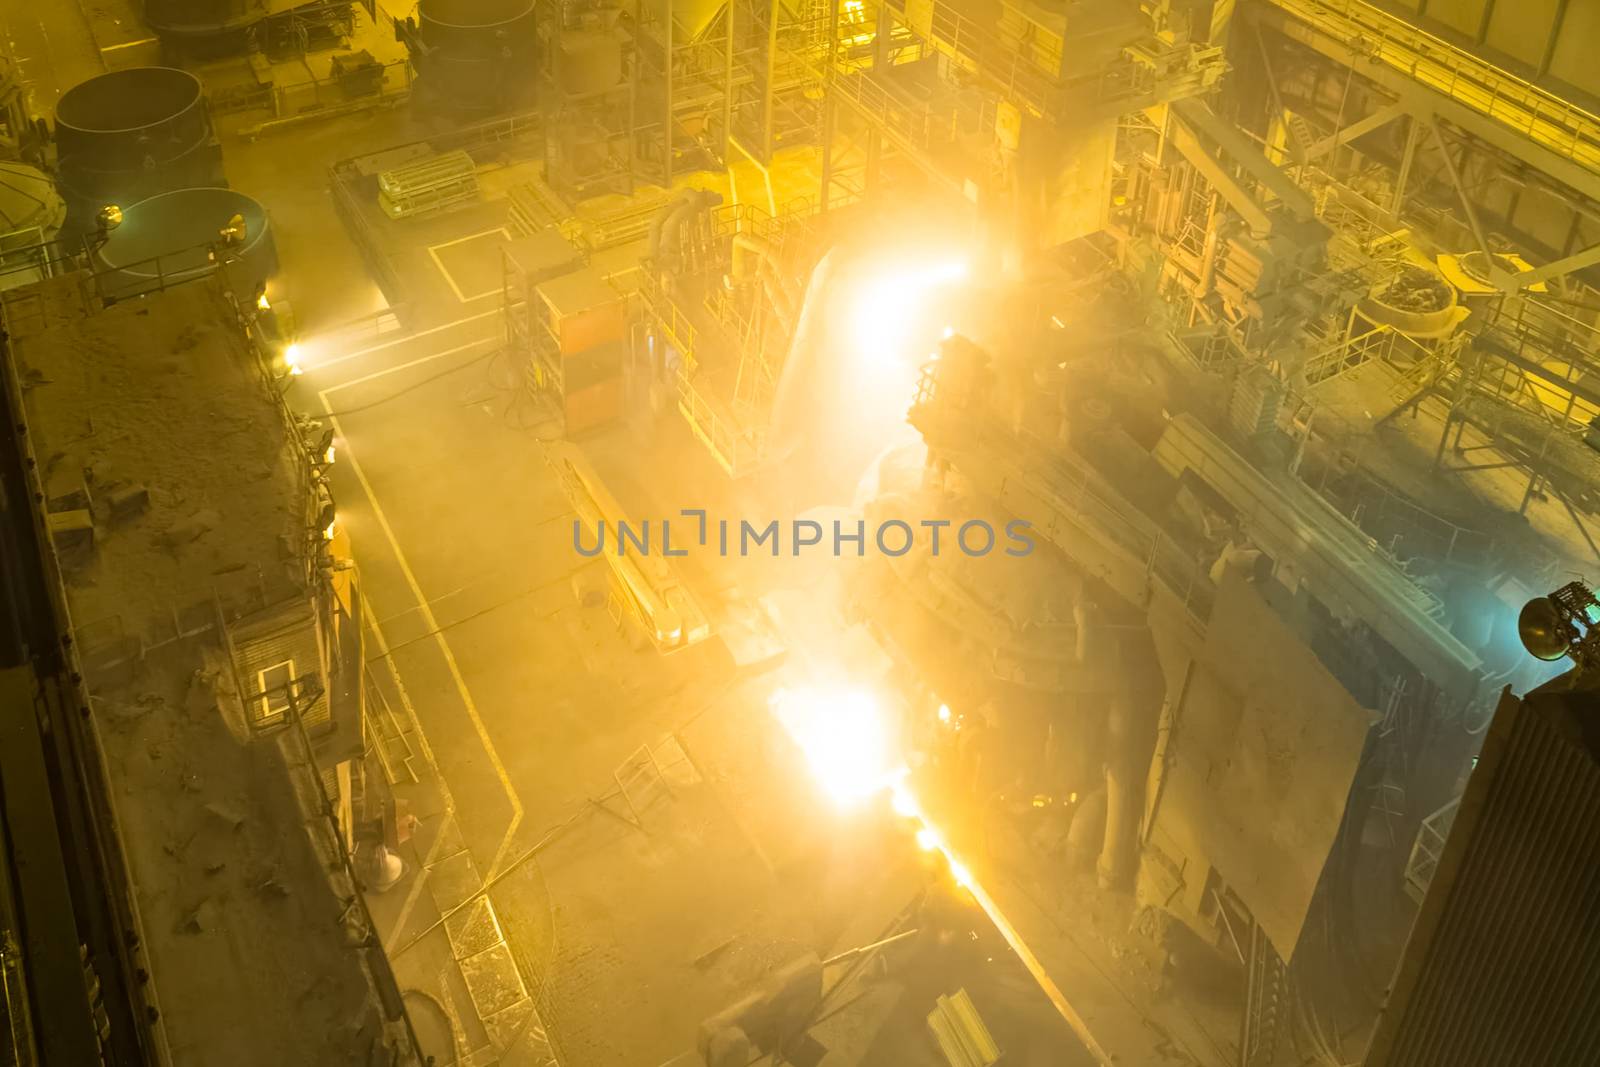 Electric arc furnace. Steel melting plant. Metal foundry